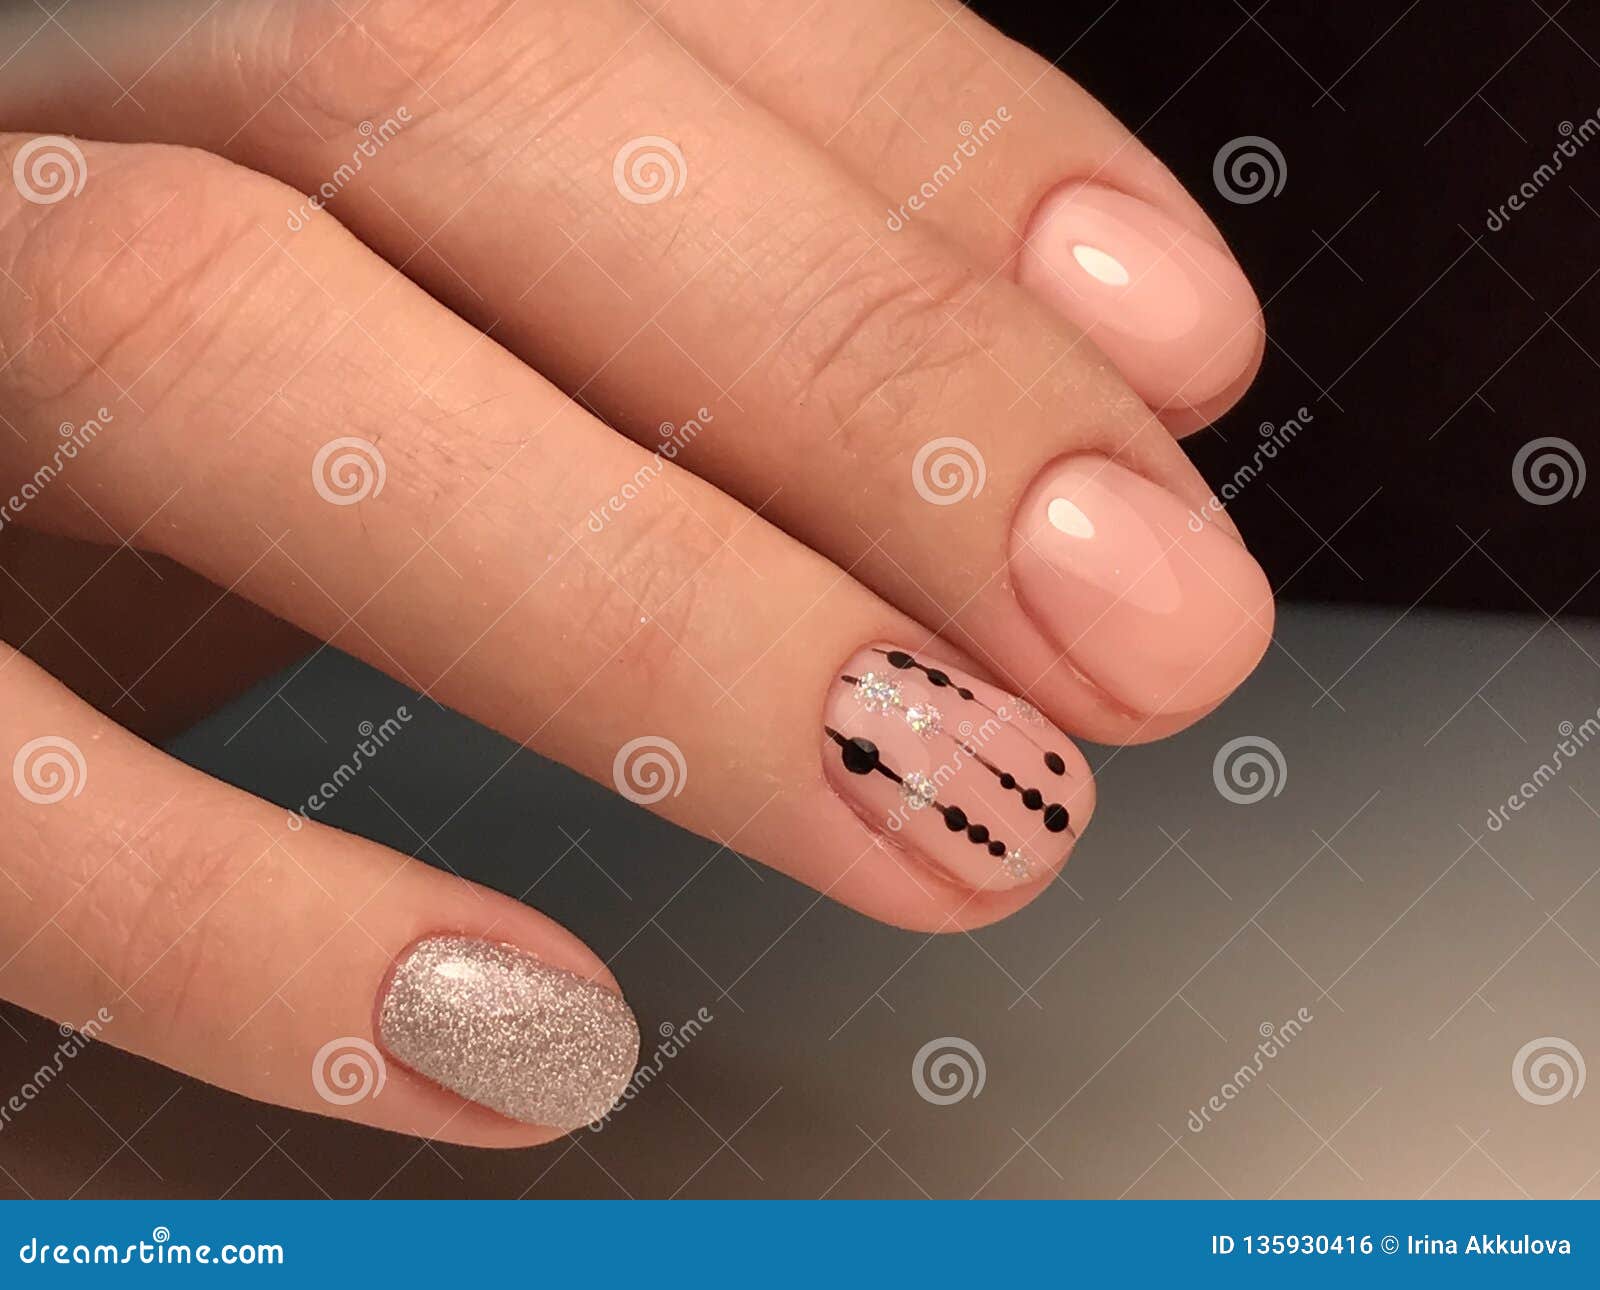 Beautiful Nail Art Design PNG Images | PNG Free Download - Pikbest